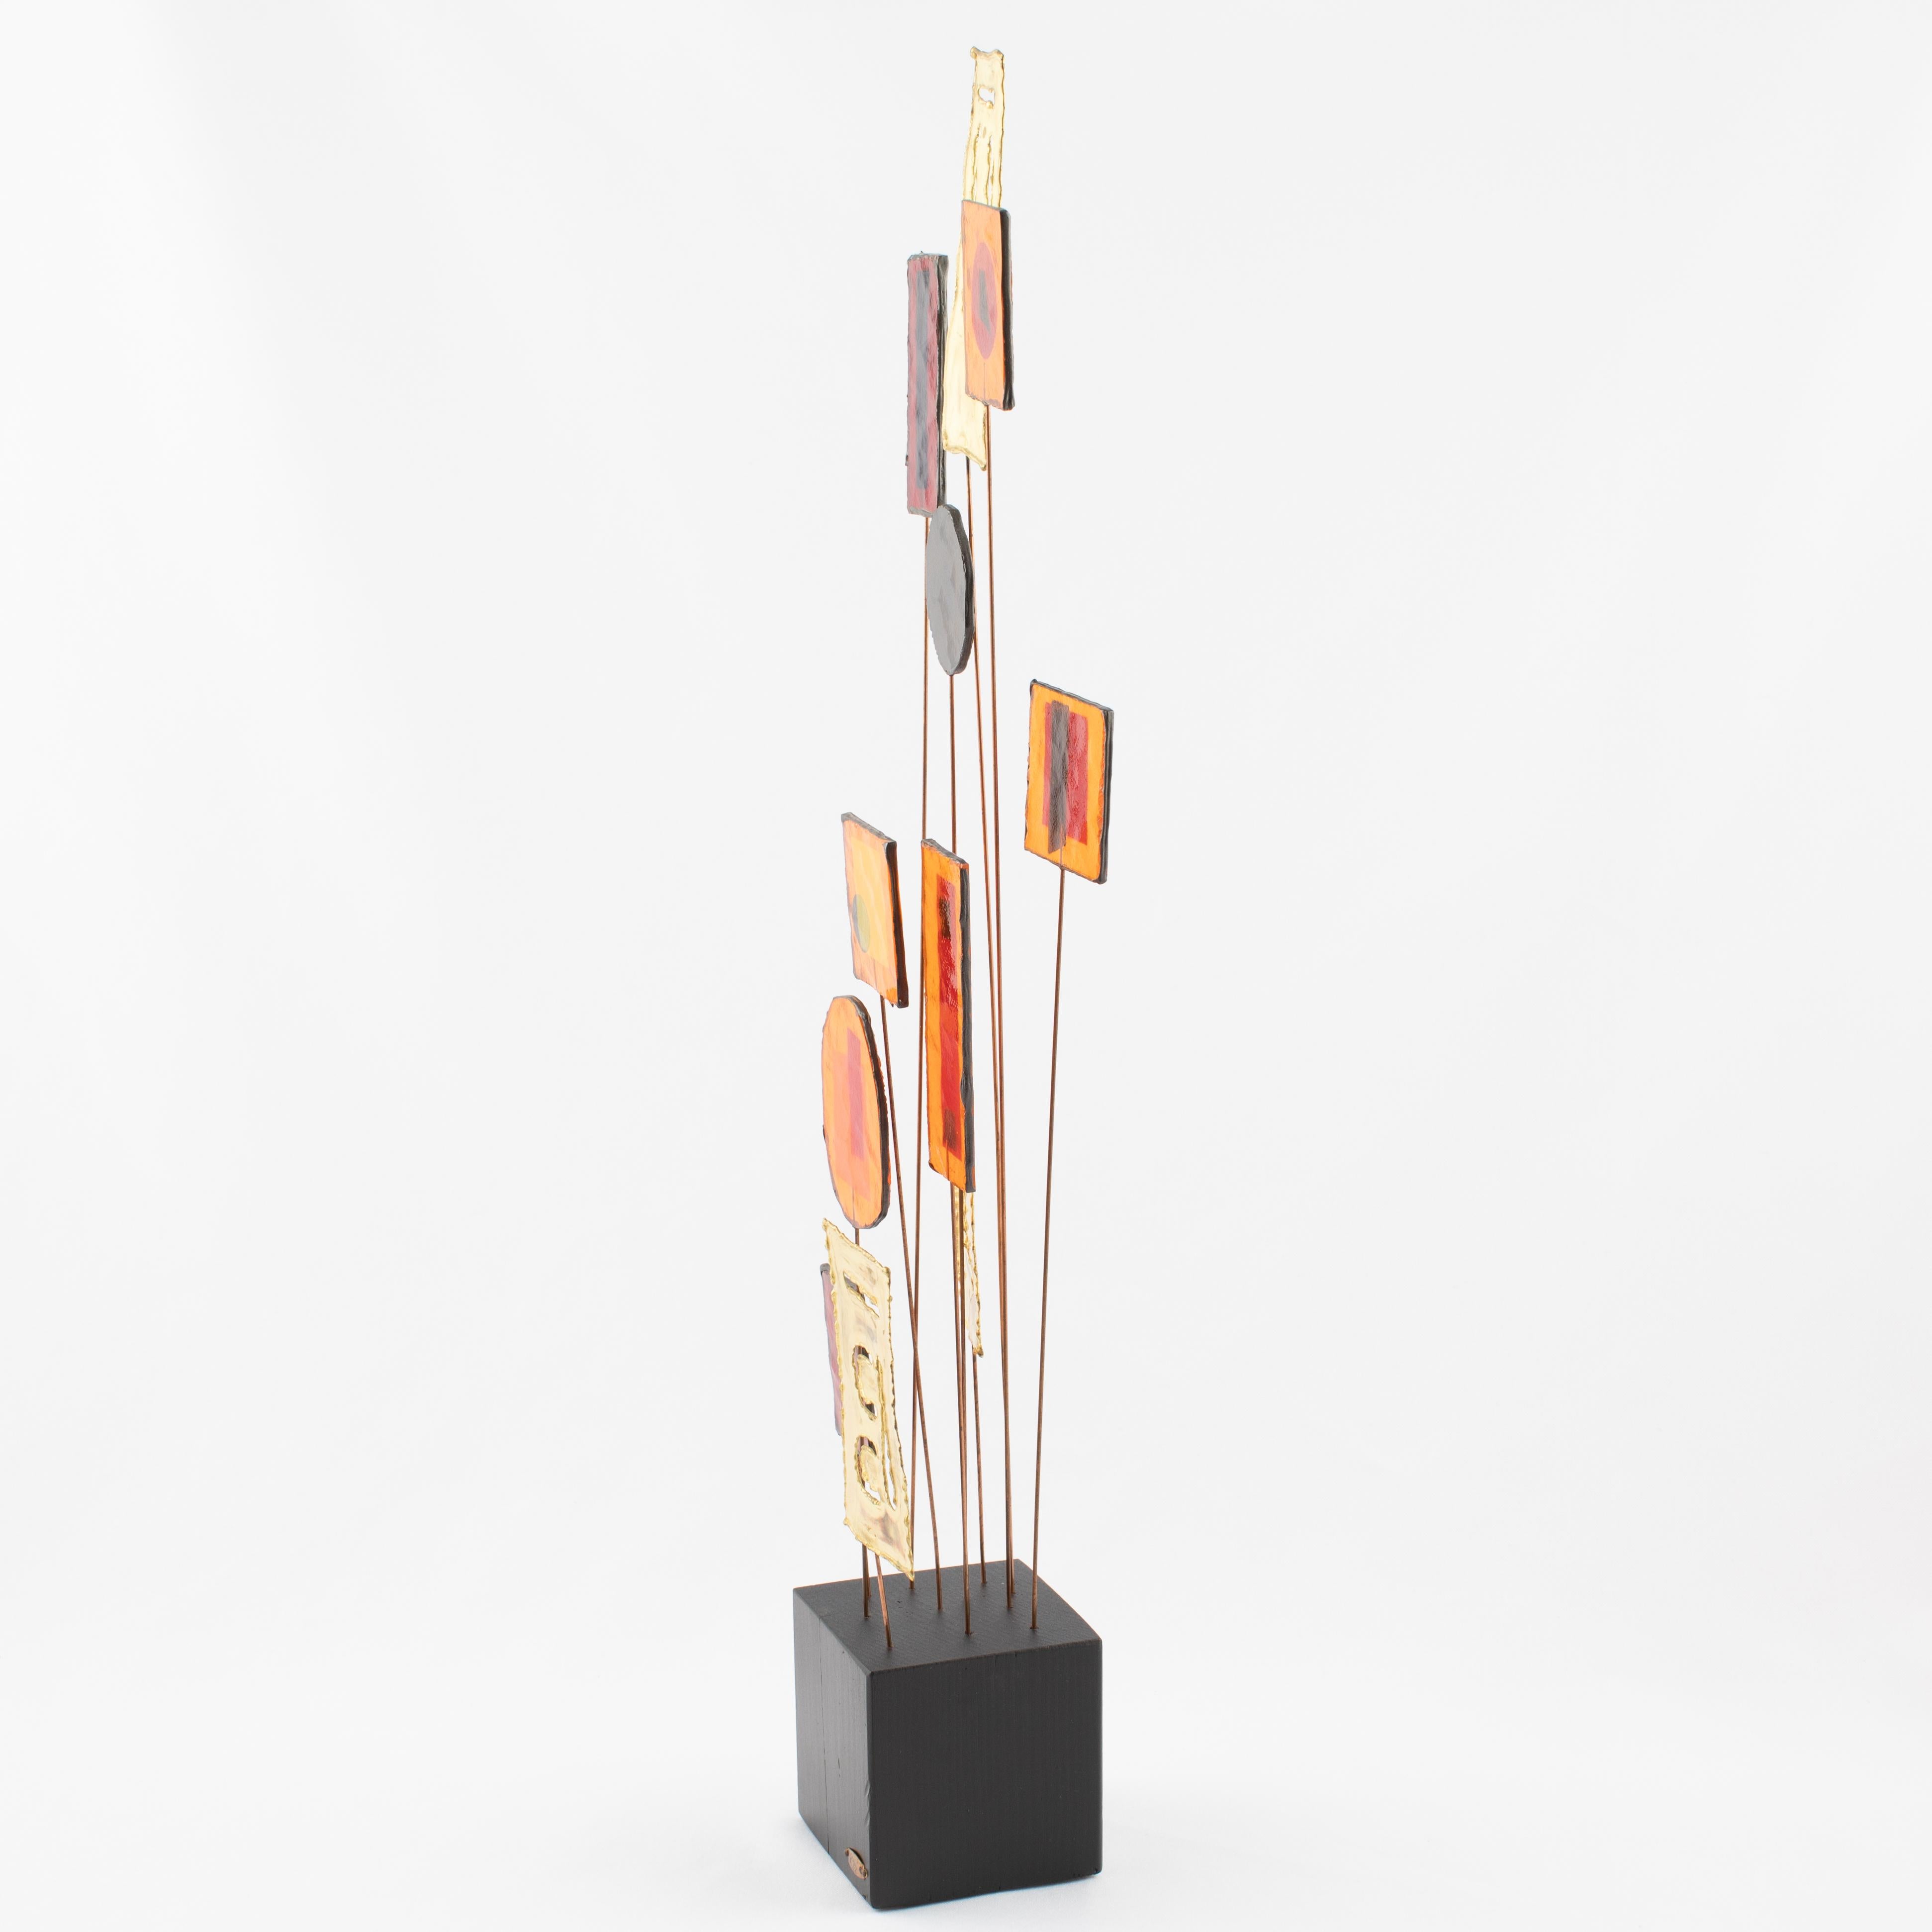 Tabletop sculpture features colorful resin disks and rectangles along with torch-cut brass rectangles supported by copper rods mounted to a black-painted wooden base. Made by Artisan House and signed 